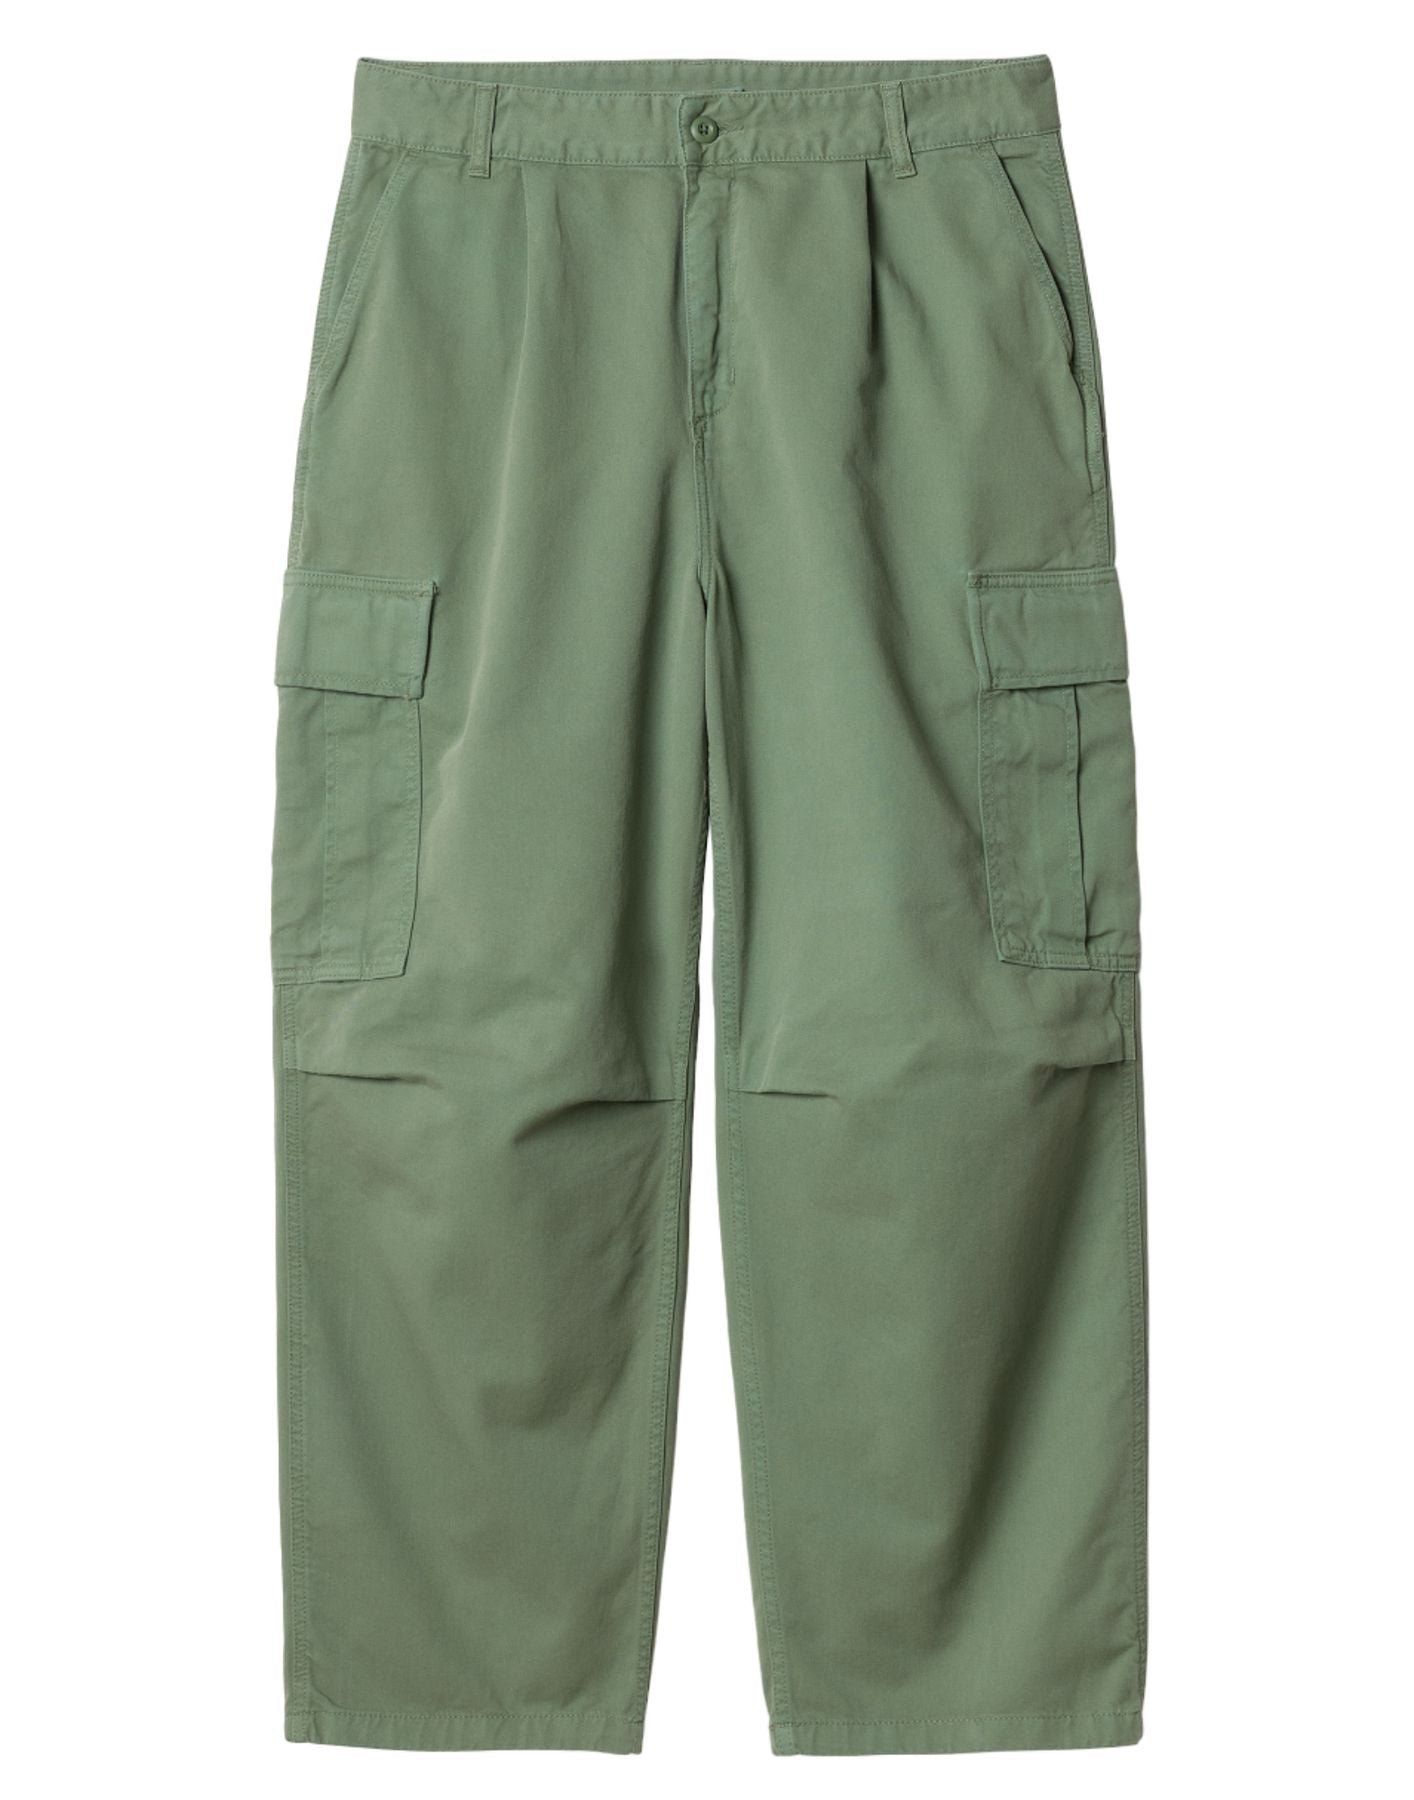 Pants for man I031218 29NGD DUCK GREEN CARHARTT WIP